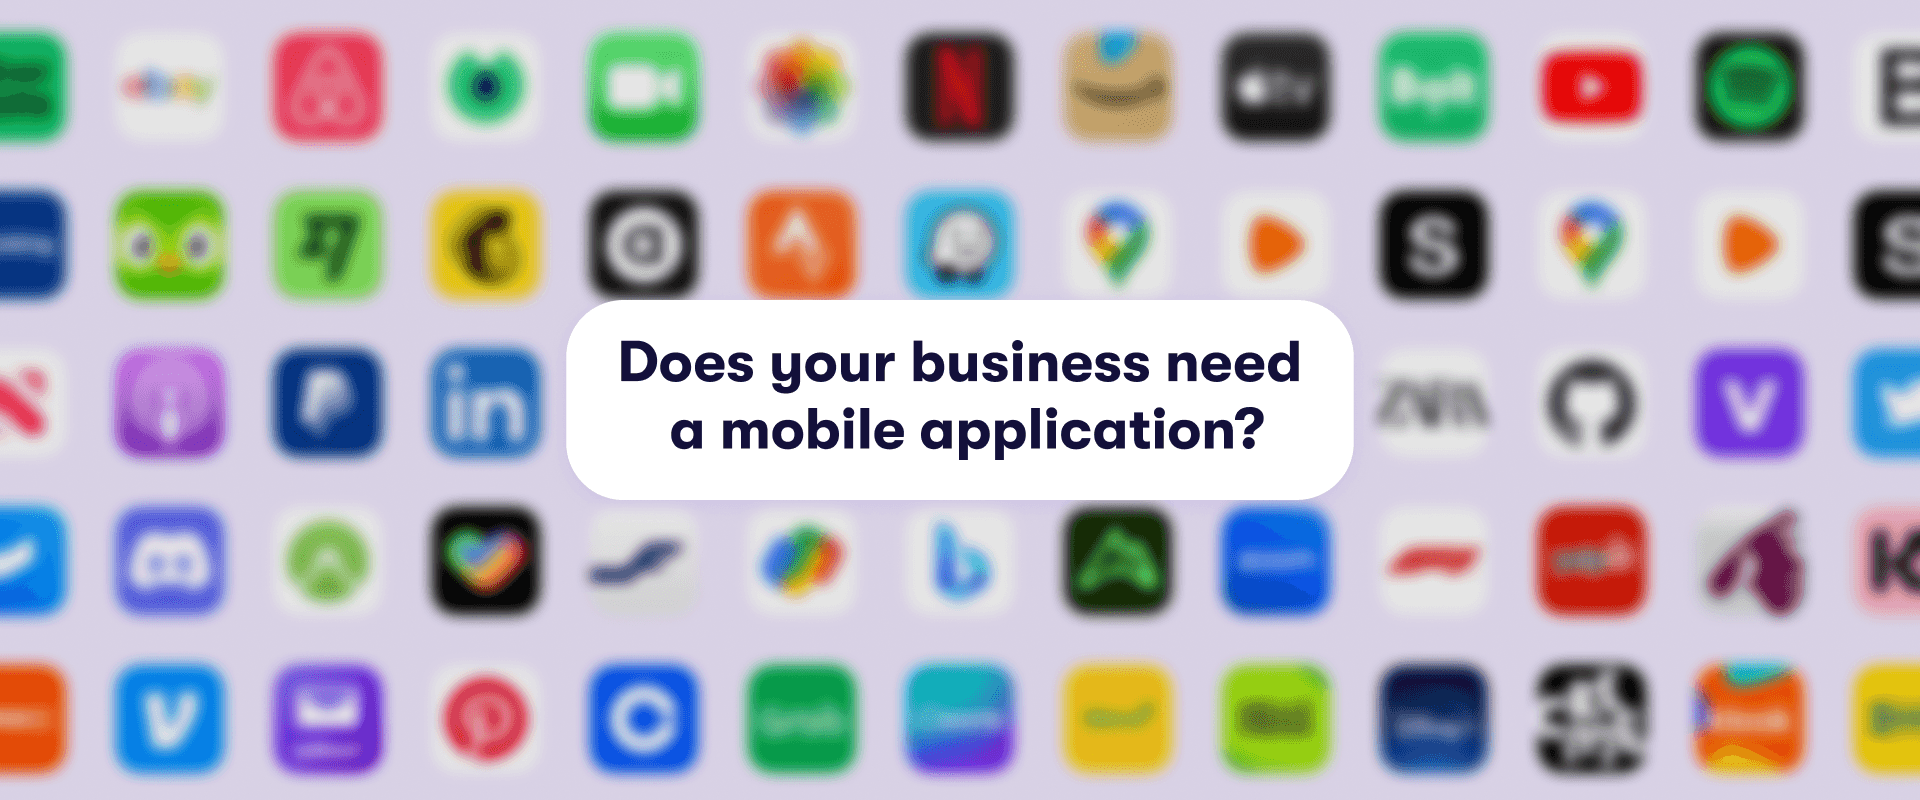 Does your business need a mobile application? 